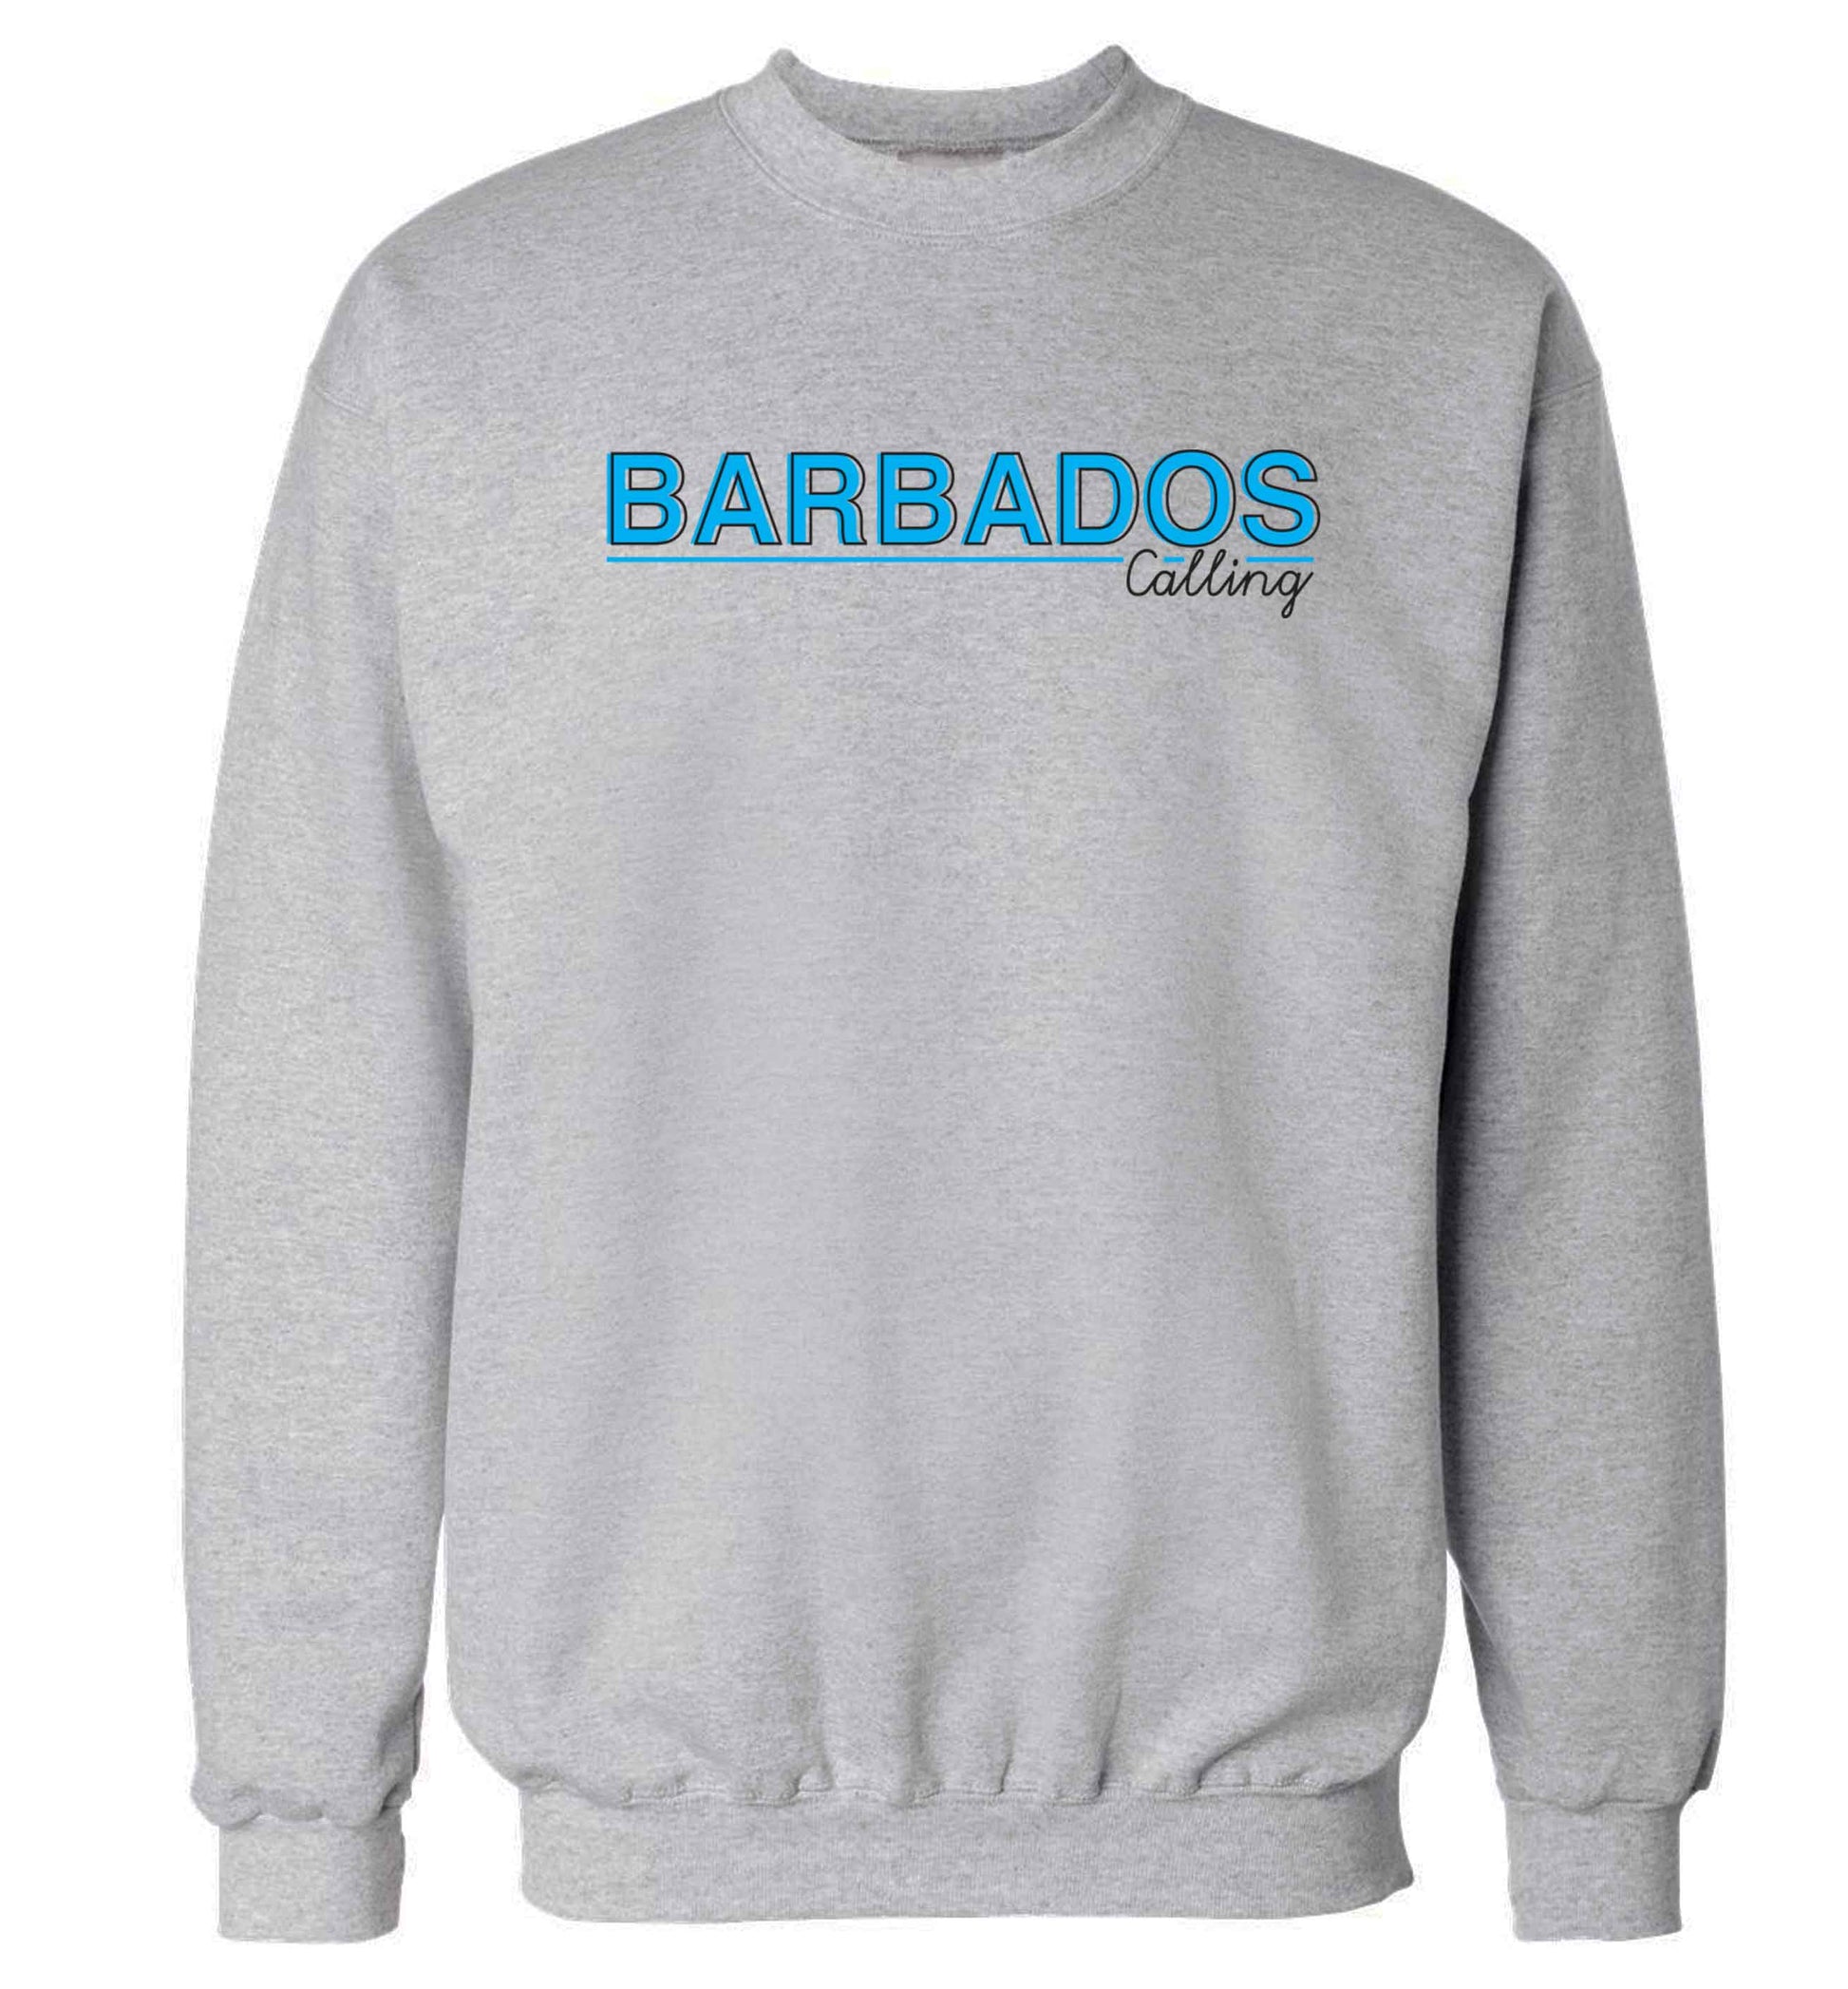 Barbados calling Adult's unisex grey Sweater 2XL